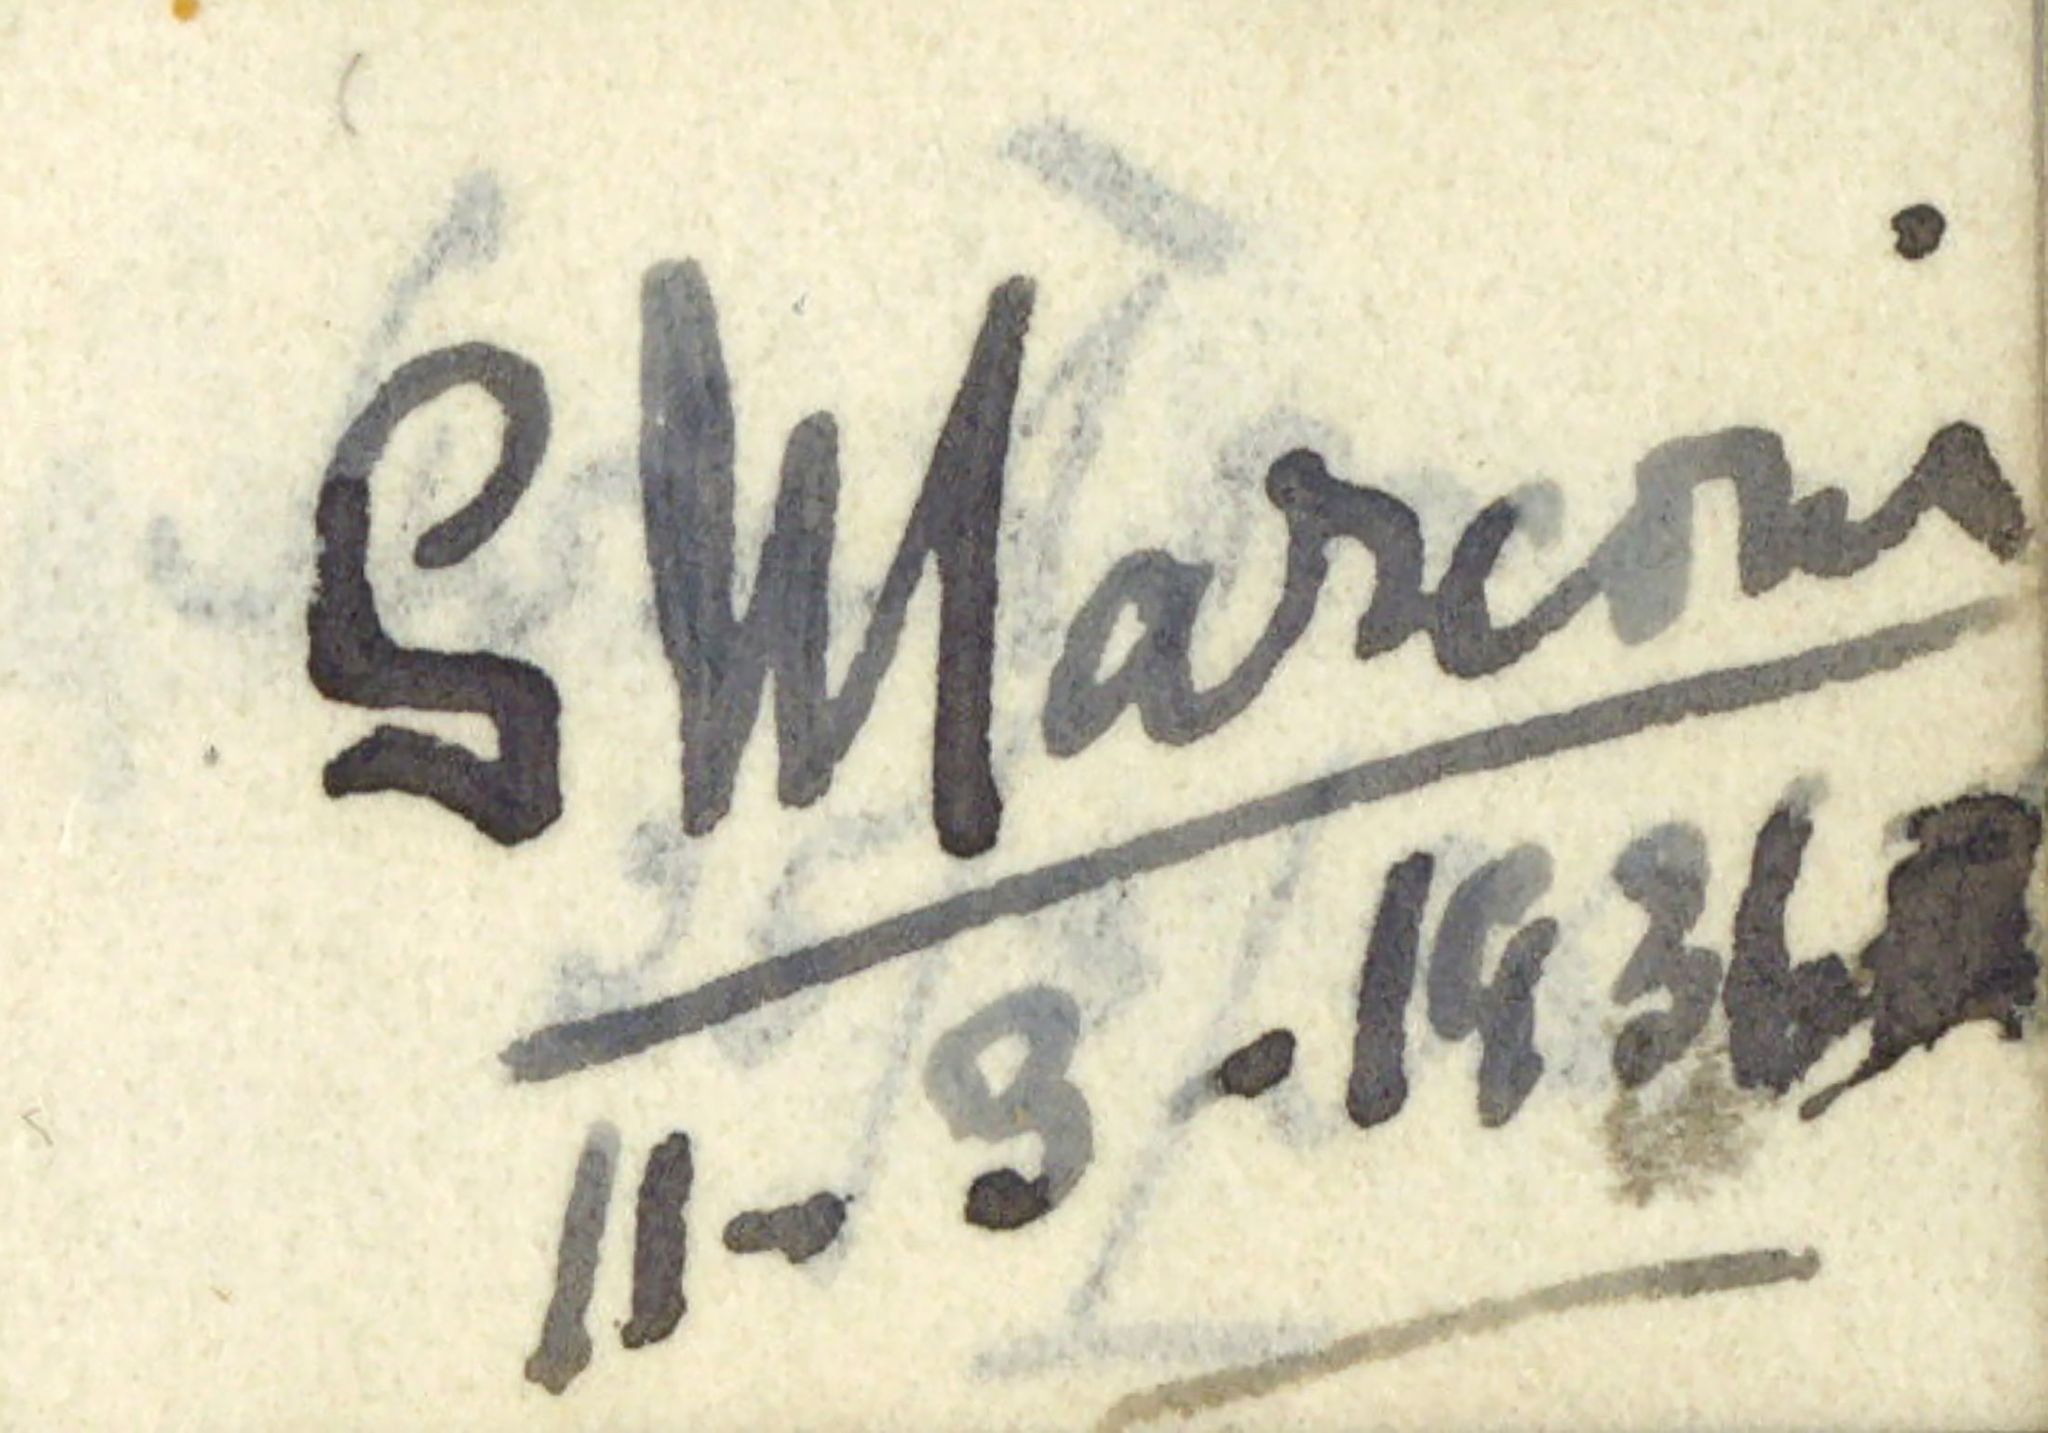 MINIATURE AUTOGRAPH BOOK - CHURCHILL, CHAMBERLAIN - Autograph book containing the signatures of - Image 3 of 4